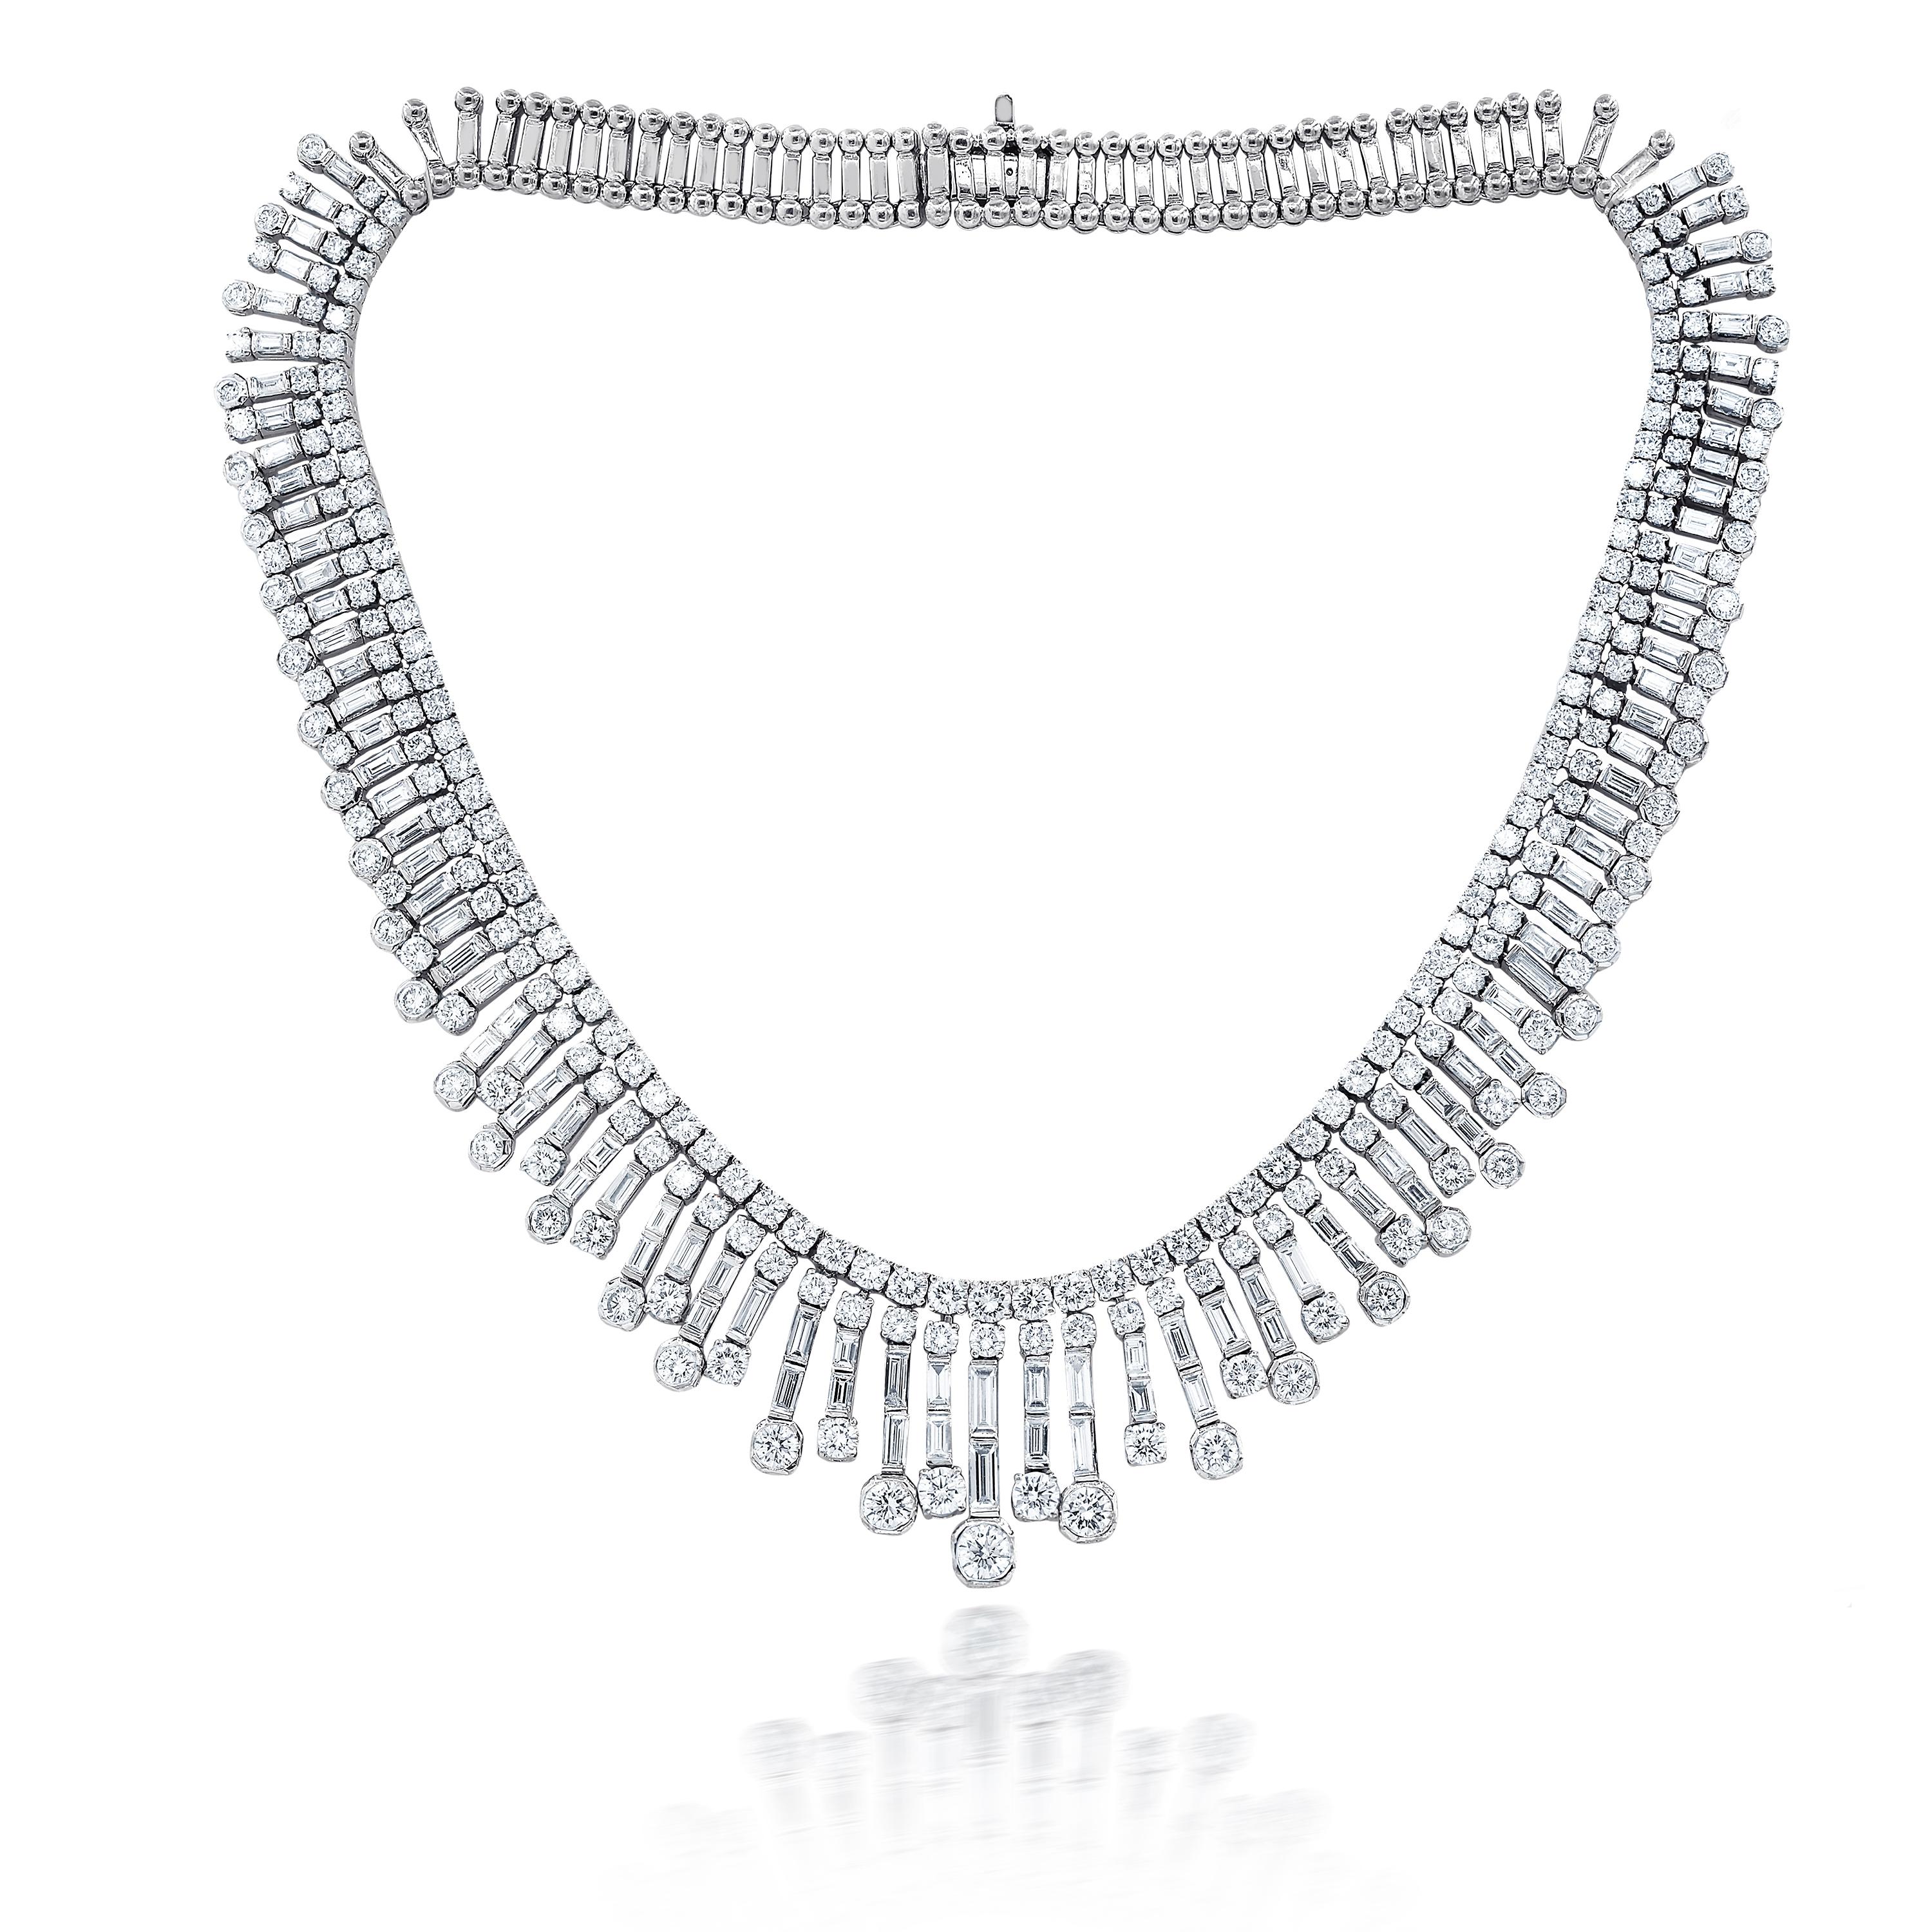 Multi-Strand Diamond Necklaces, features 30.00 Carats of diamonds, F-G in color and VVS-VS in Clarity  
Crafted in Platinum.
Comes with Gemological report  
